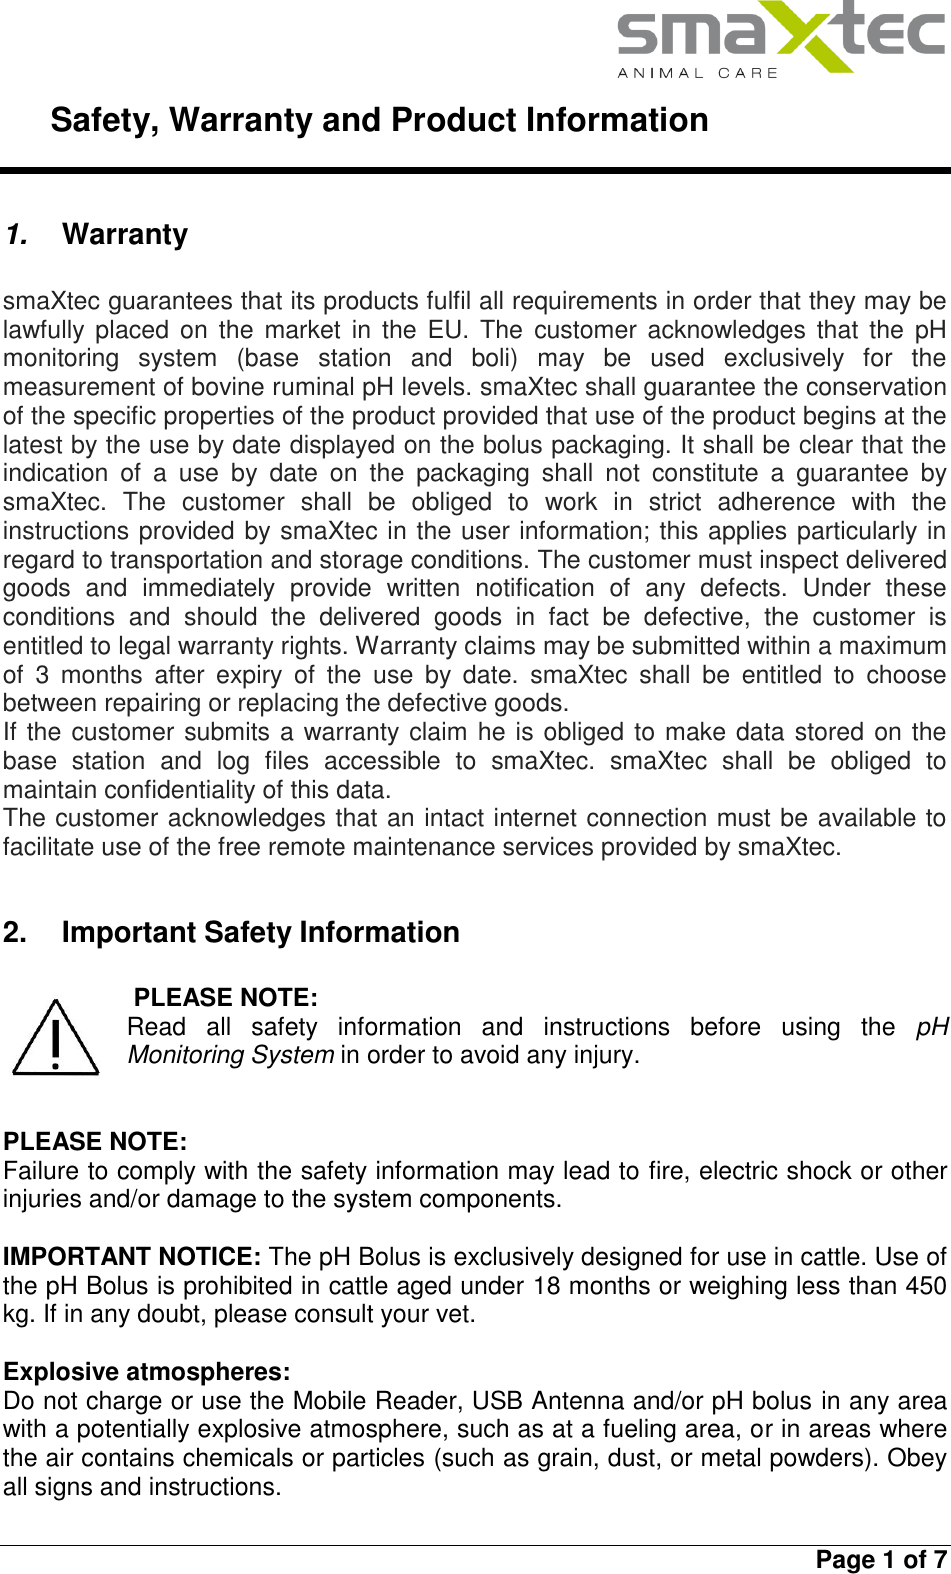     Safety, Warranty and Product Information   Page 1 of 7  1. Warranty  smaXtec guarantees that its products fulfil all requirements in order that they may be lawfully placed  on  the market in  the  EU.  The  customer acknowledges that the  pH monitoring  system  (base  station  and  boli)  may  be  used  exclusively  for  the measurement of bovine ruminal pH levels. smaXtec shall guarantee the conservation of the specific properties of the product provided that use of the product begins at the latest by the use by date displayed on the bolus packaging. It shall be clear that the indication  of  a  use  by  date  on  the  packaging  shall  not  constitute  a  guarantee  by smaXtec.  The  customer  shall  be  obliged  to  work  in  strict  adherence  with  the instructions provided by smaXtec in the user information; this applies particularly in regard to transportation and storage conditions. The customer must inspect delivered goods  and  immediately  provide  written  notification  of  any  defects.  Under  these conditions  and  should  the  delivered  goods  in  fact  be  defective,  the  customer  is entitled to legal warranty rights. Warranty claims may be submitted within a maximum of  3  months  after  expiry  of  the  use  by  date.  smaXtec  shall  be  entitled  to  choose between repairing or replacing the defective goods. If the customer submits a warranty claim he is obliged to make data stored on the base  station  and  log  files  accessible  to  smaXtec.  smaXtec  shall  be  obliged  to maintain confidentiality of this data. The customer acknowledges that an intact internet connection must be available to facilitate use of the free remote maintenance services provided by smaXtec.  2.  Important Safety Information   PLEASE NOTE:  Read  all  safety  information  and  instructions  before  using  the  pH Monitoring System in order to avoid any injury.   PLEASE NOTE:  Failure to comply with the safety information may lead to fire, electric shock or other injuries and/or damage to the system components.  IMPORTANT NOTICE: The pH Bolus is exclusively designed for use in cattle. Use of the pH Bolus is prohibited in cattle aged under 18 months or weighing less than 450 kg. If in any doubt, please consult your vet.  Explosive atmospheres: Do not charge or use the Mobile Reader, USB Antenna and/or pH bolus in any area with a potentially explosive atmosphere, such as at a fueling area, or in areas where the air contains chemicals or particles (such as grain, dust, or metal powders). Obey all signs and instructions.  